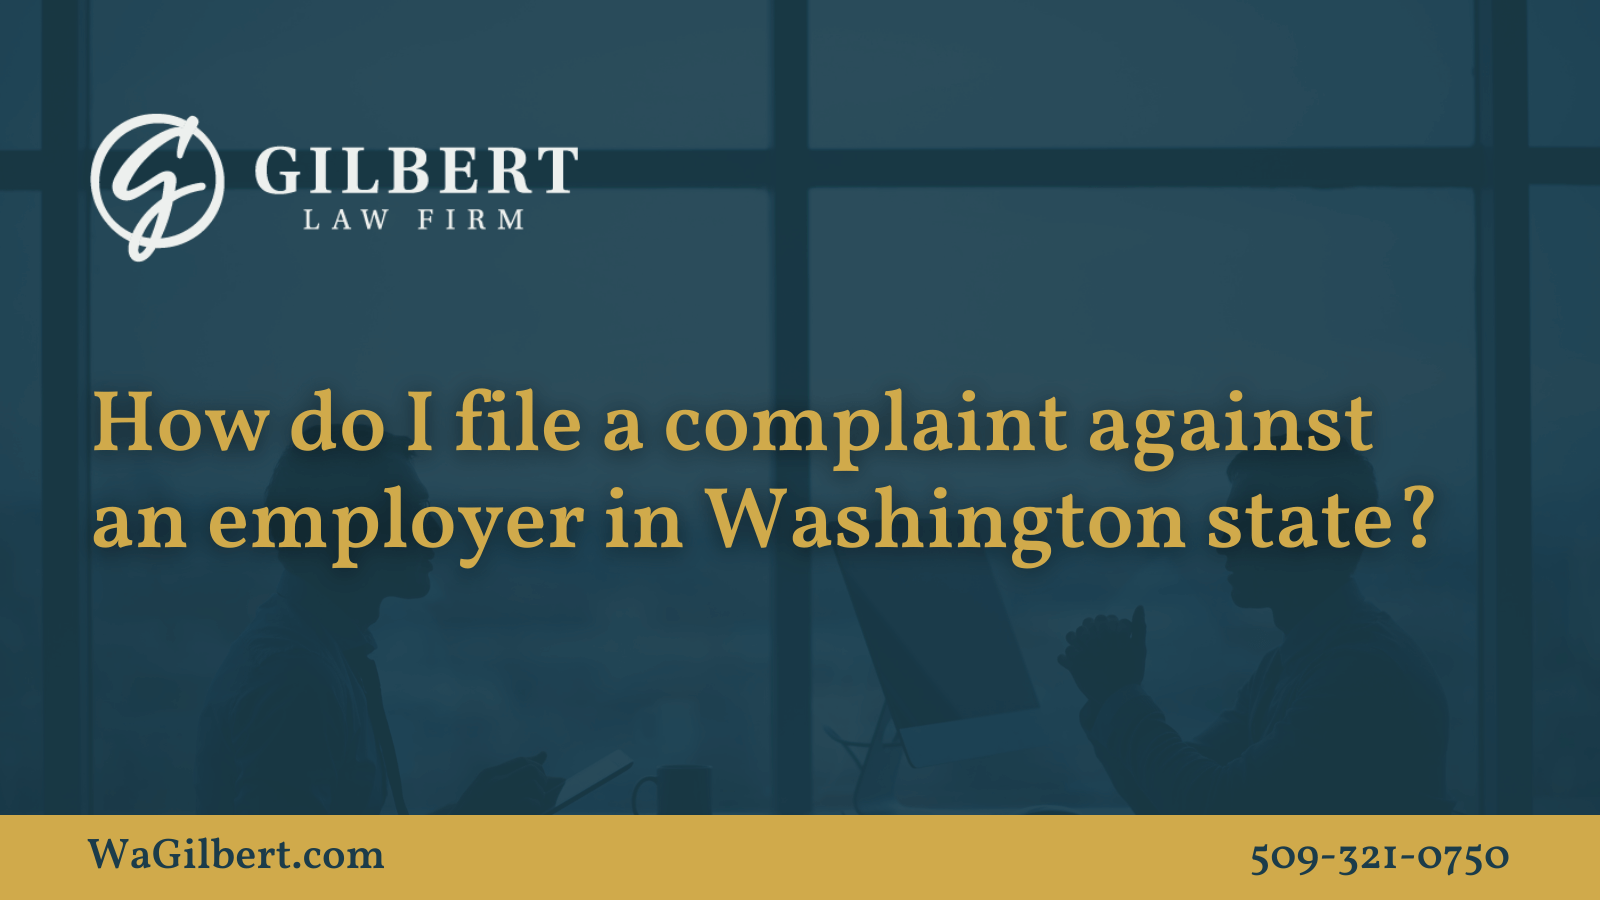 How Do I File a Complaint Against an Employer in Washington State ? - Gilbert Law Firm Spokane Washington